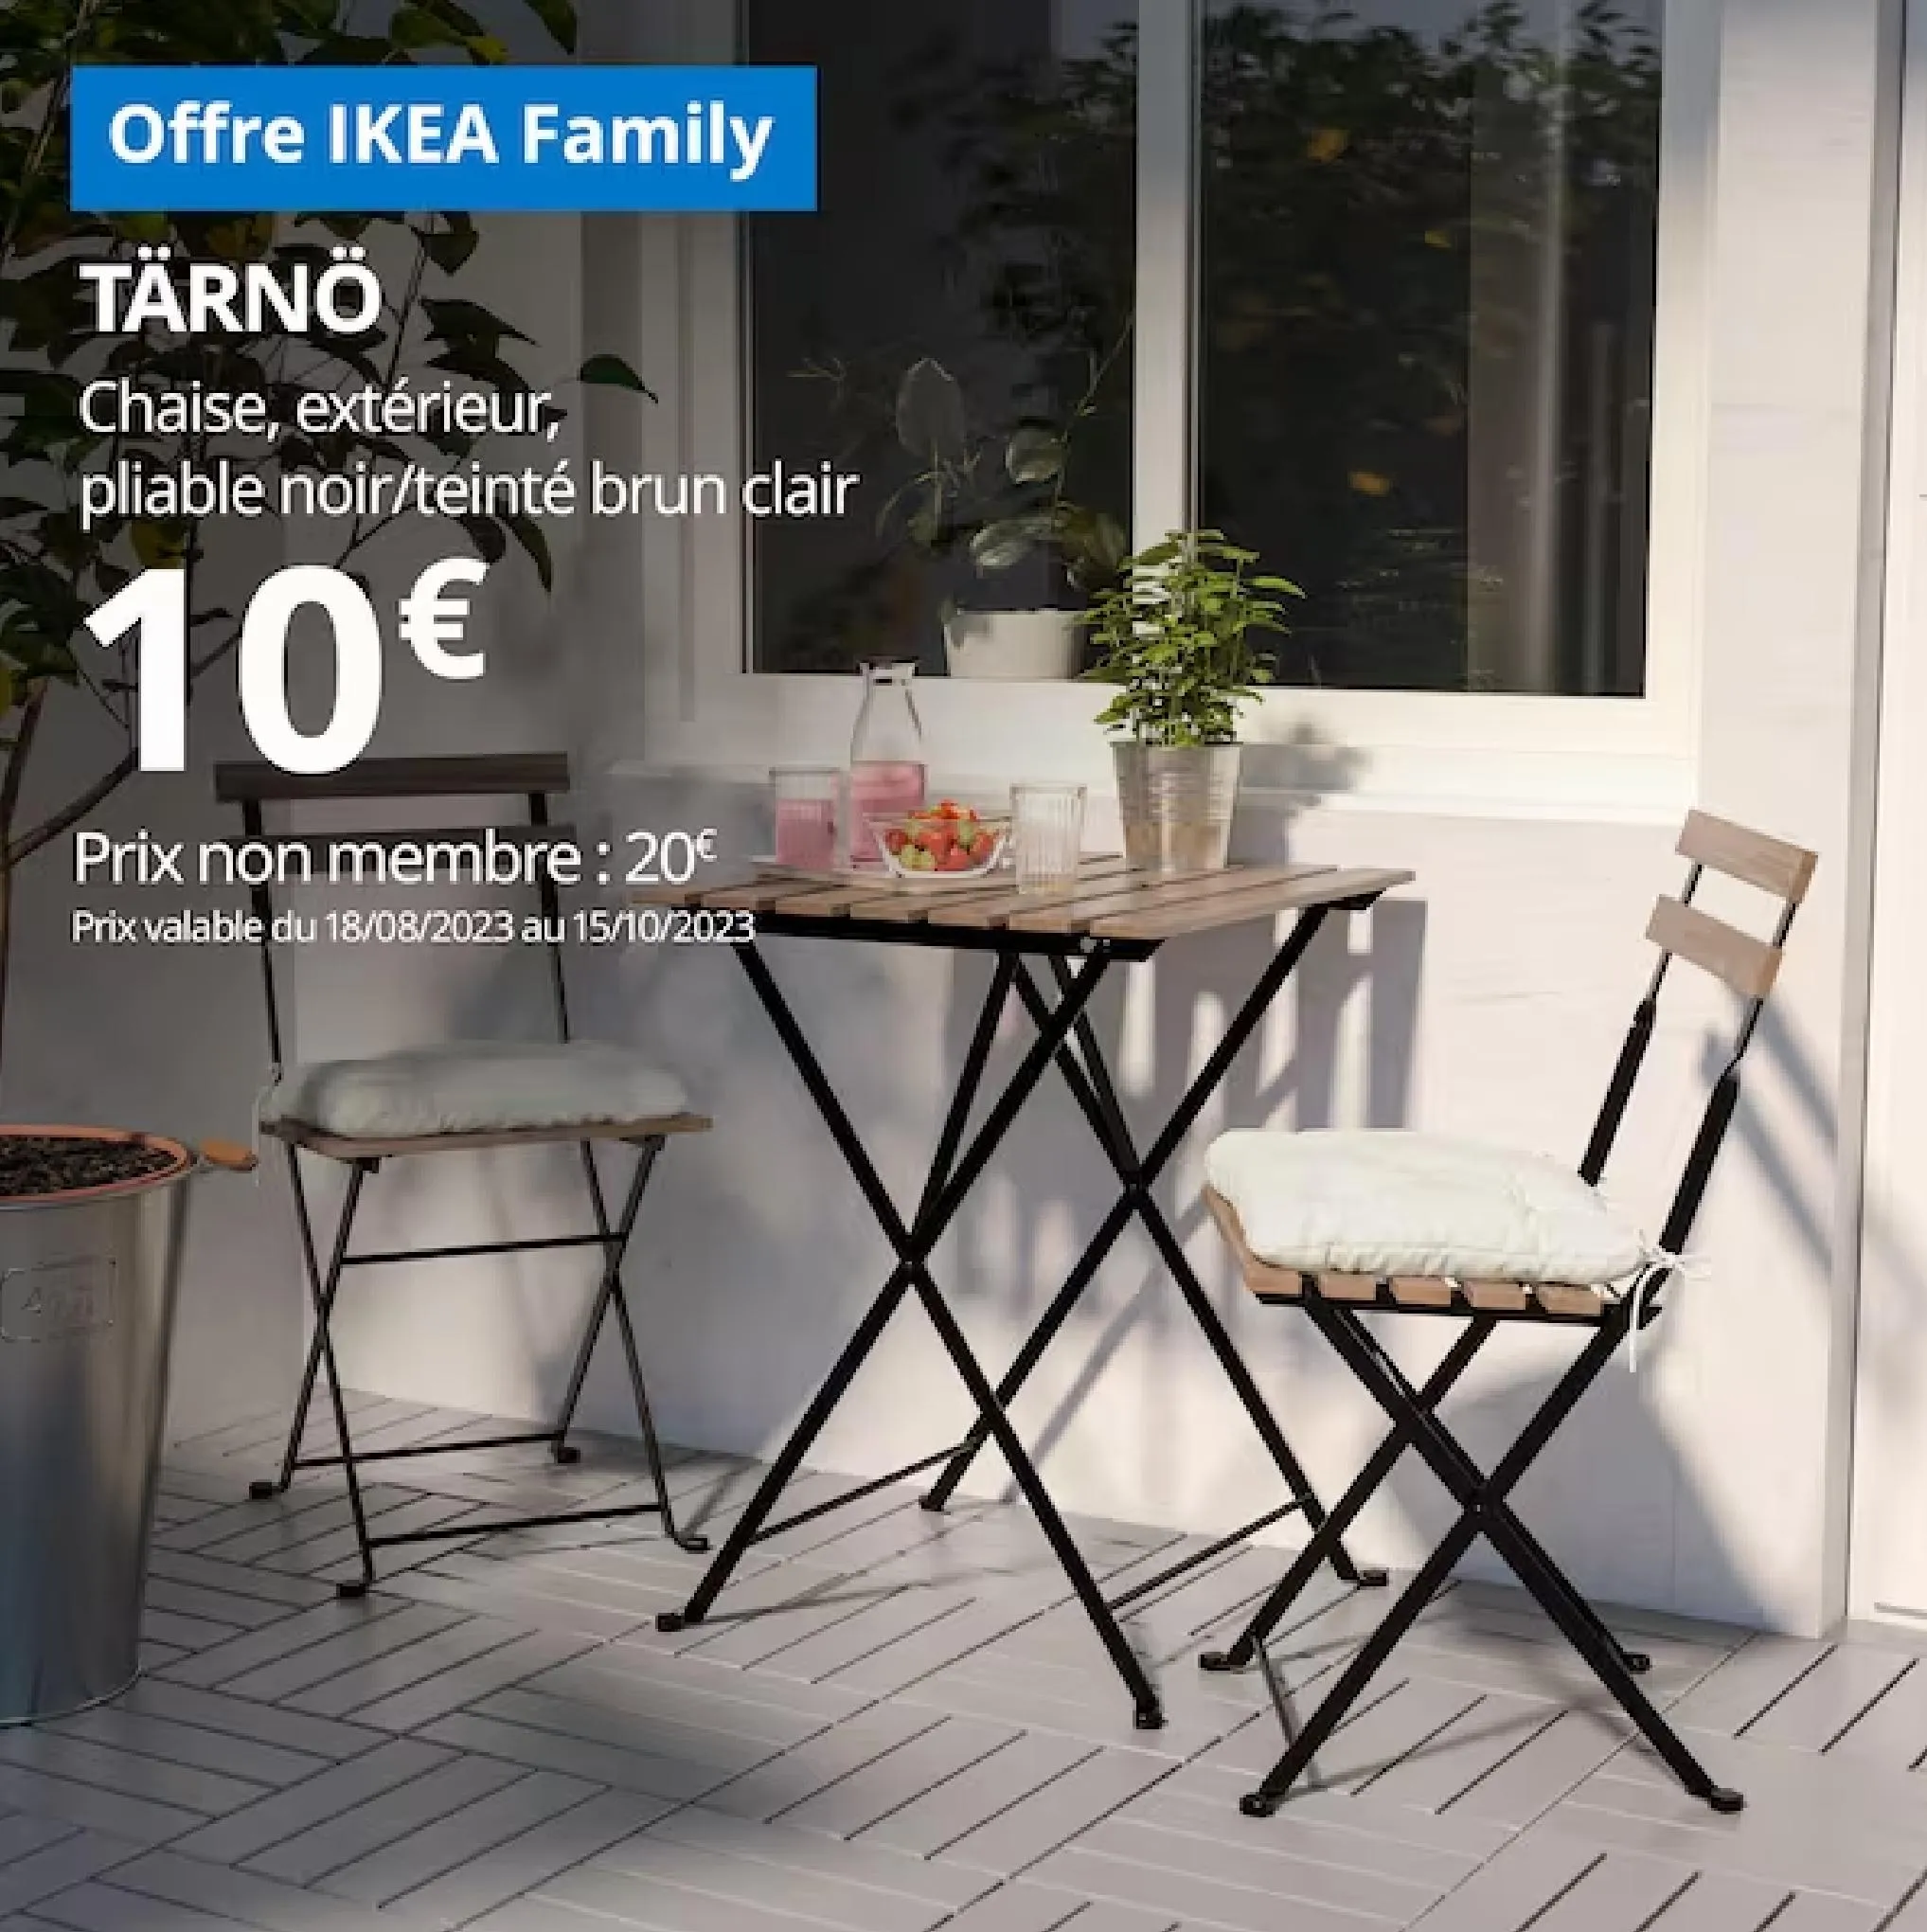 Catalogue Offre Ikea Family, page 00002